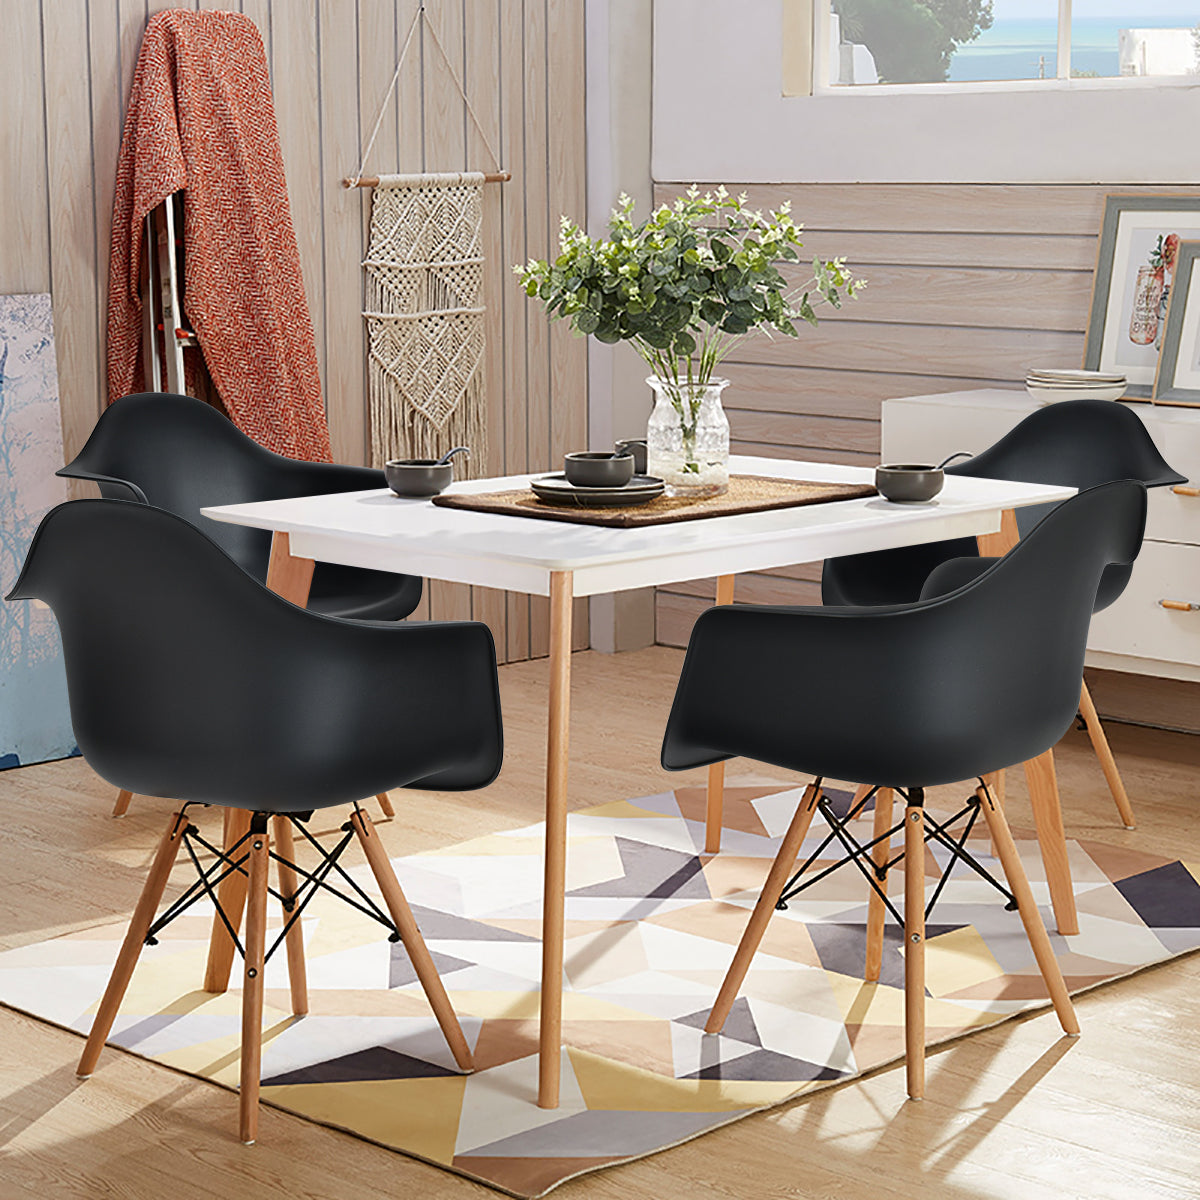 Giantex Set of 4 Modern Dining Chairs w/Natural Wood Legs